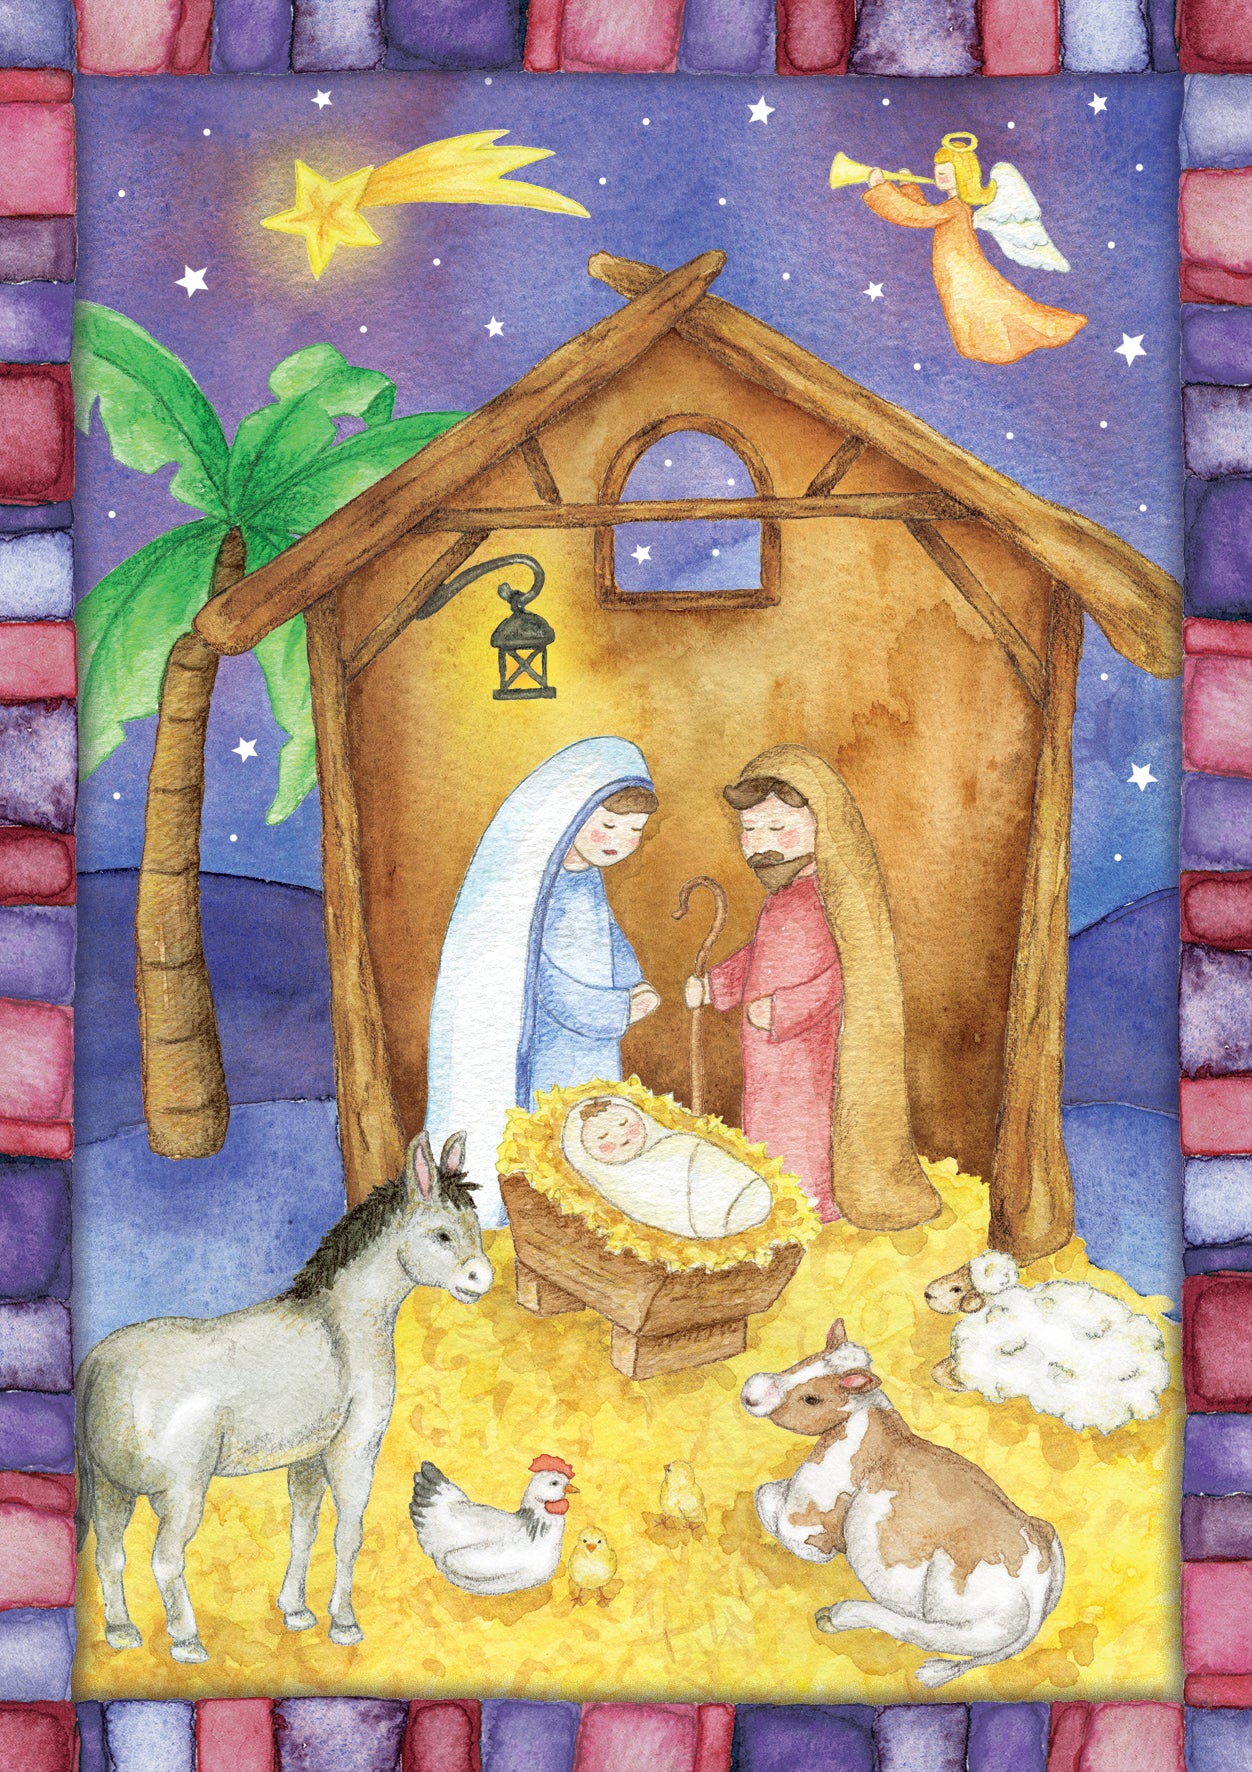 Baby In A Manger - Advent CalendarBaby In A Manger - Advent Calendar